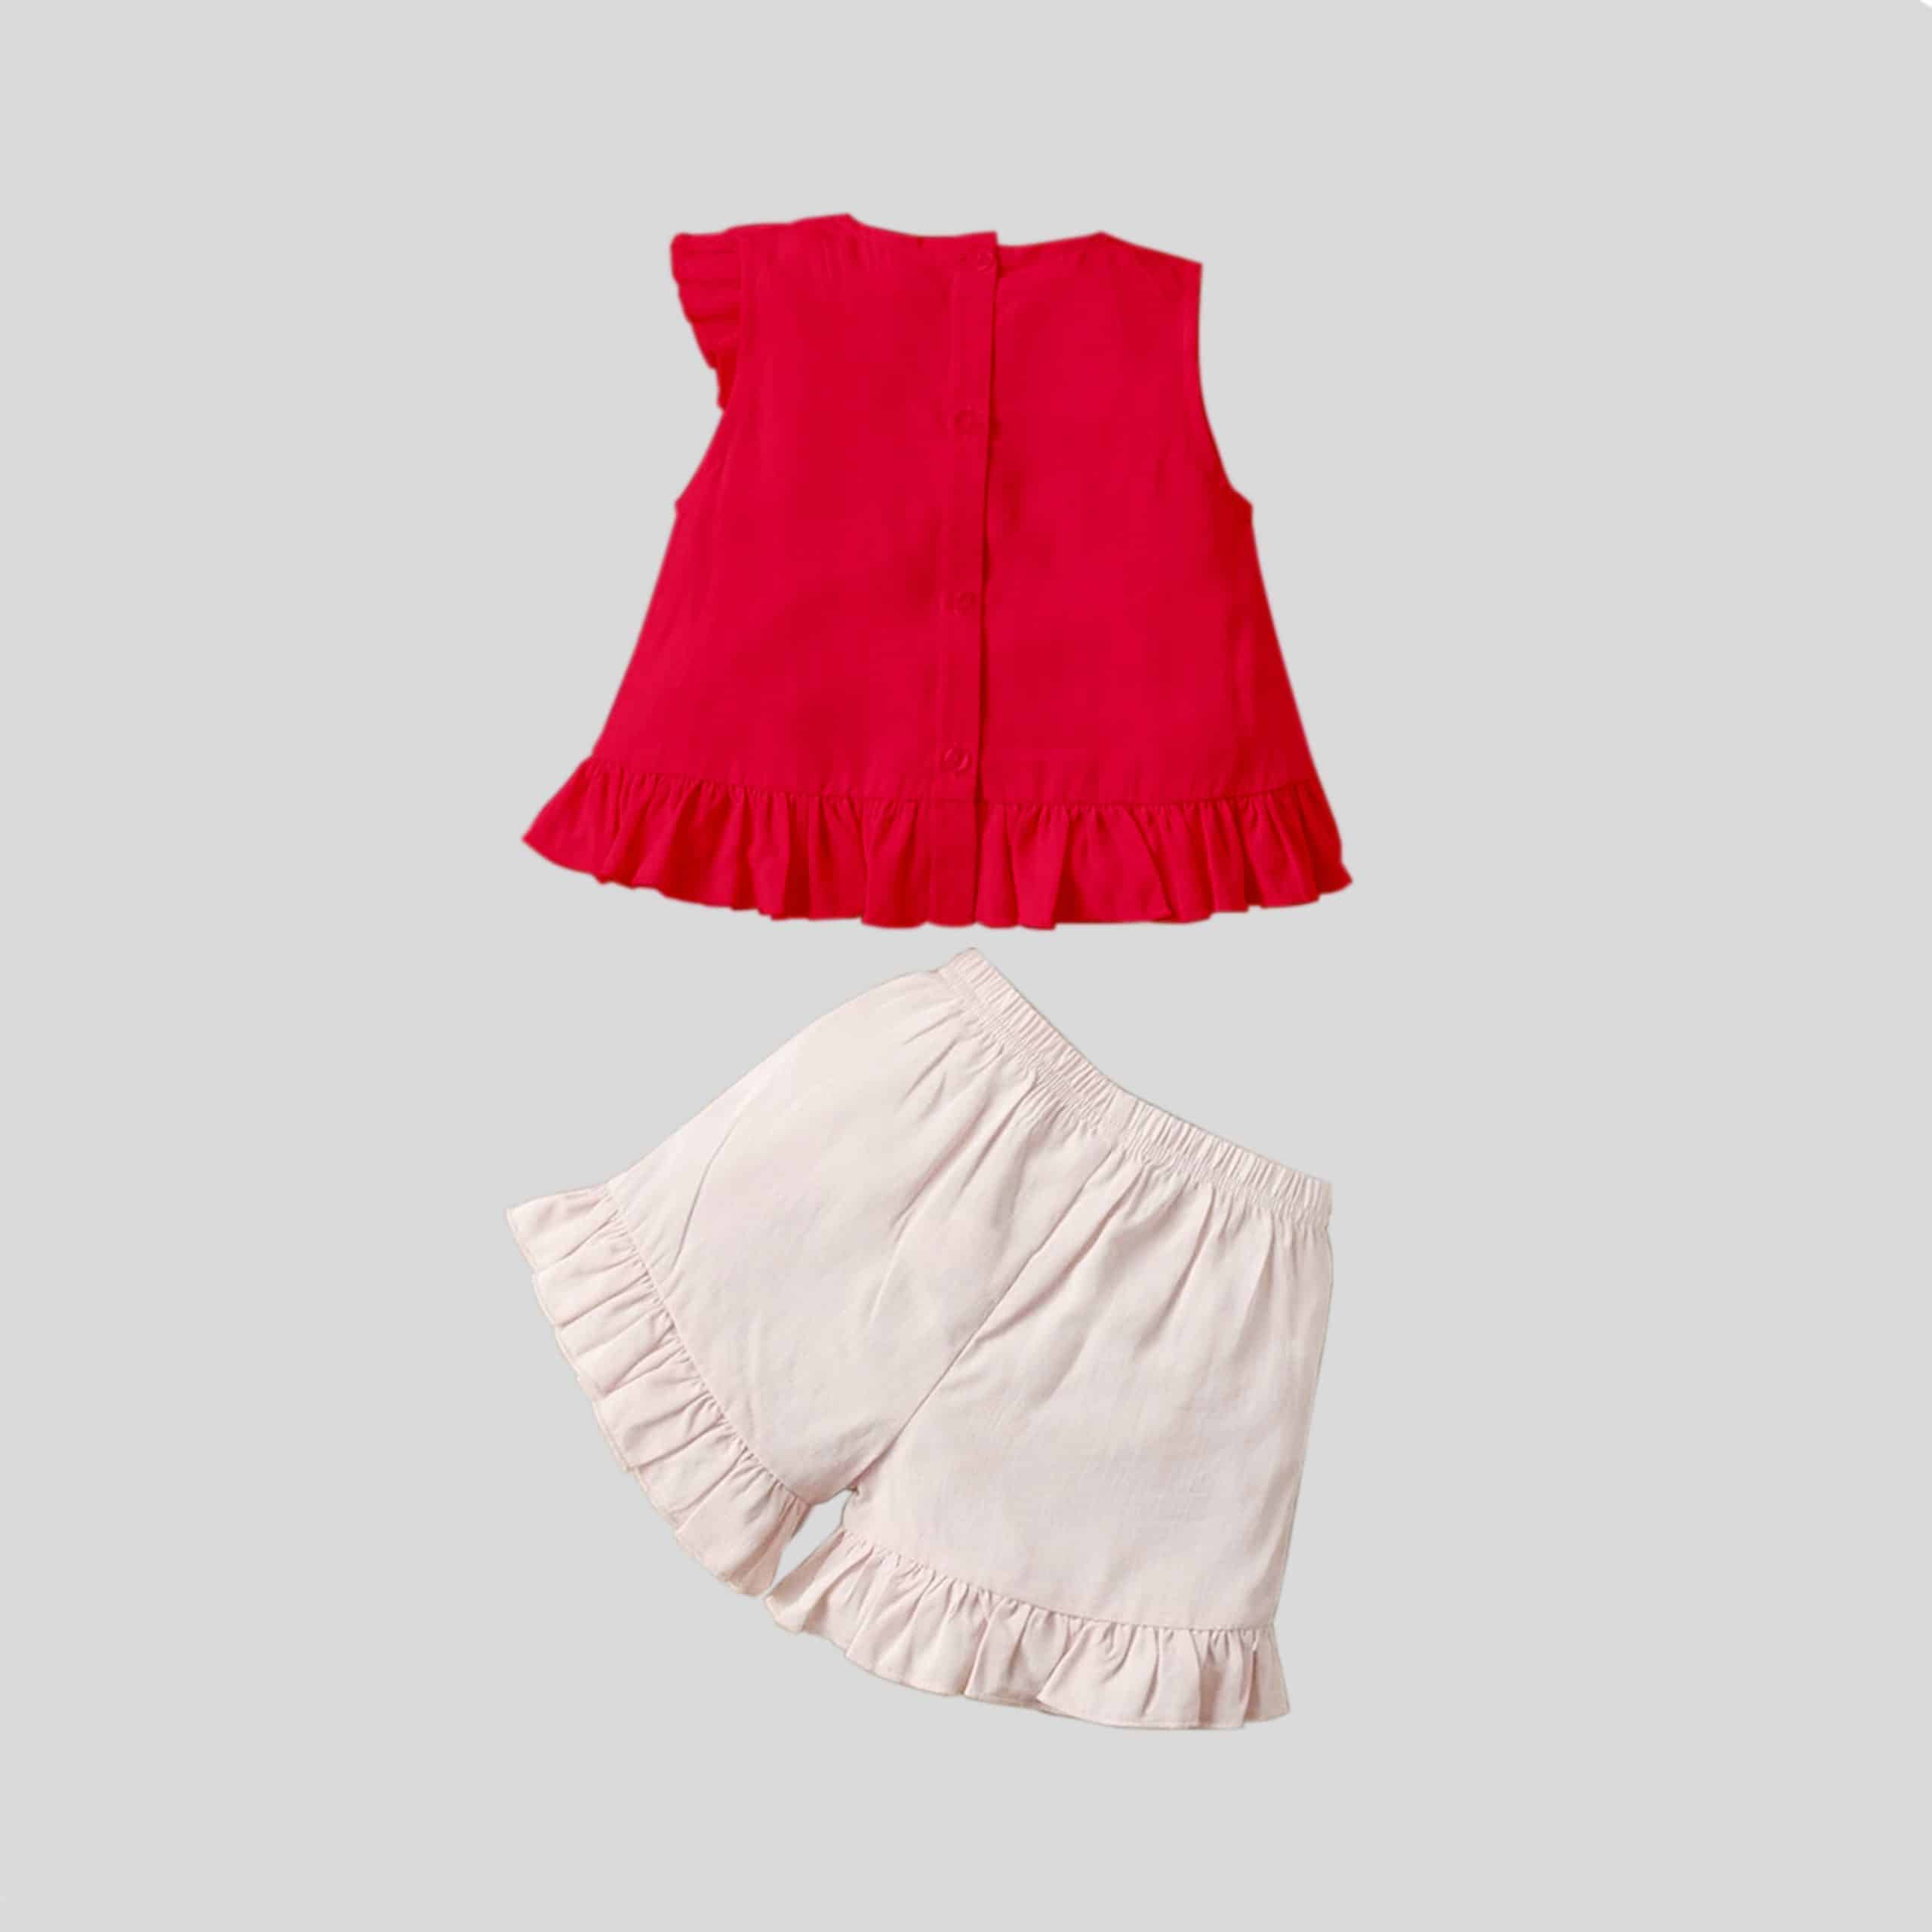 Girls sleeveless red top with cute frill detail and shorts set-RKFCW234